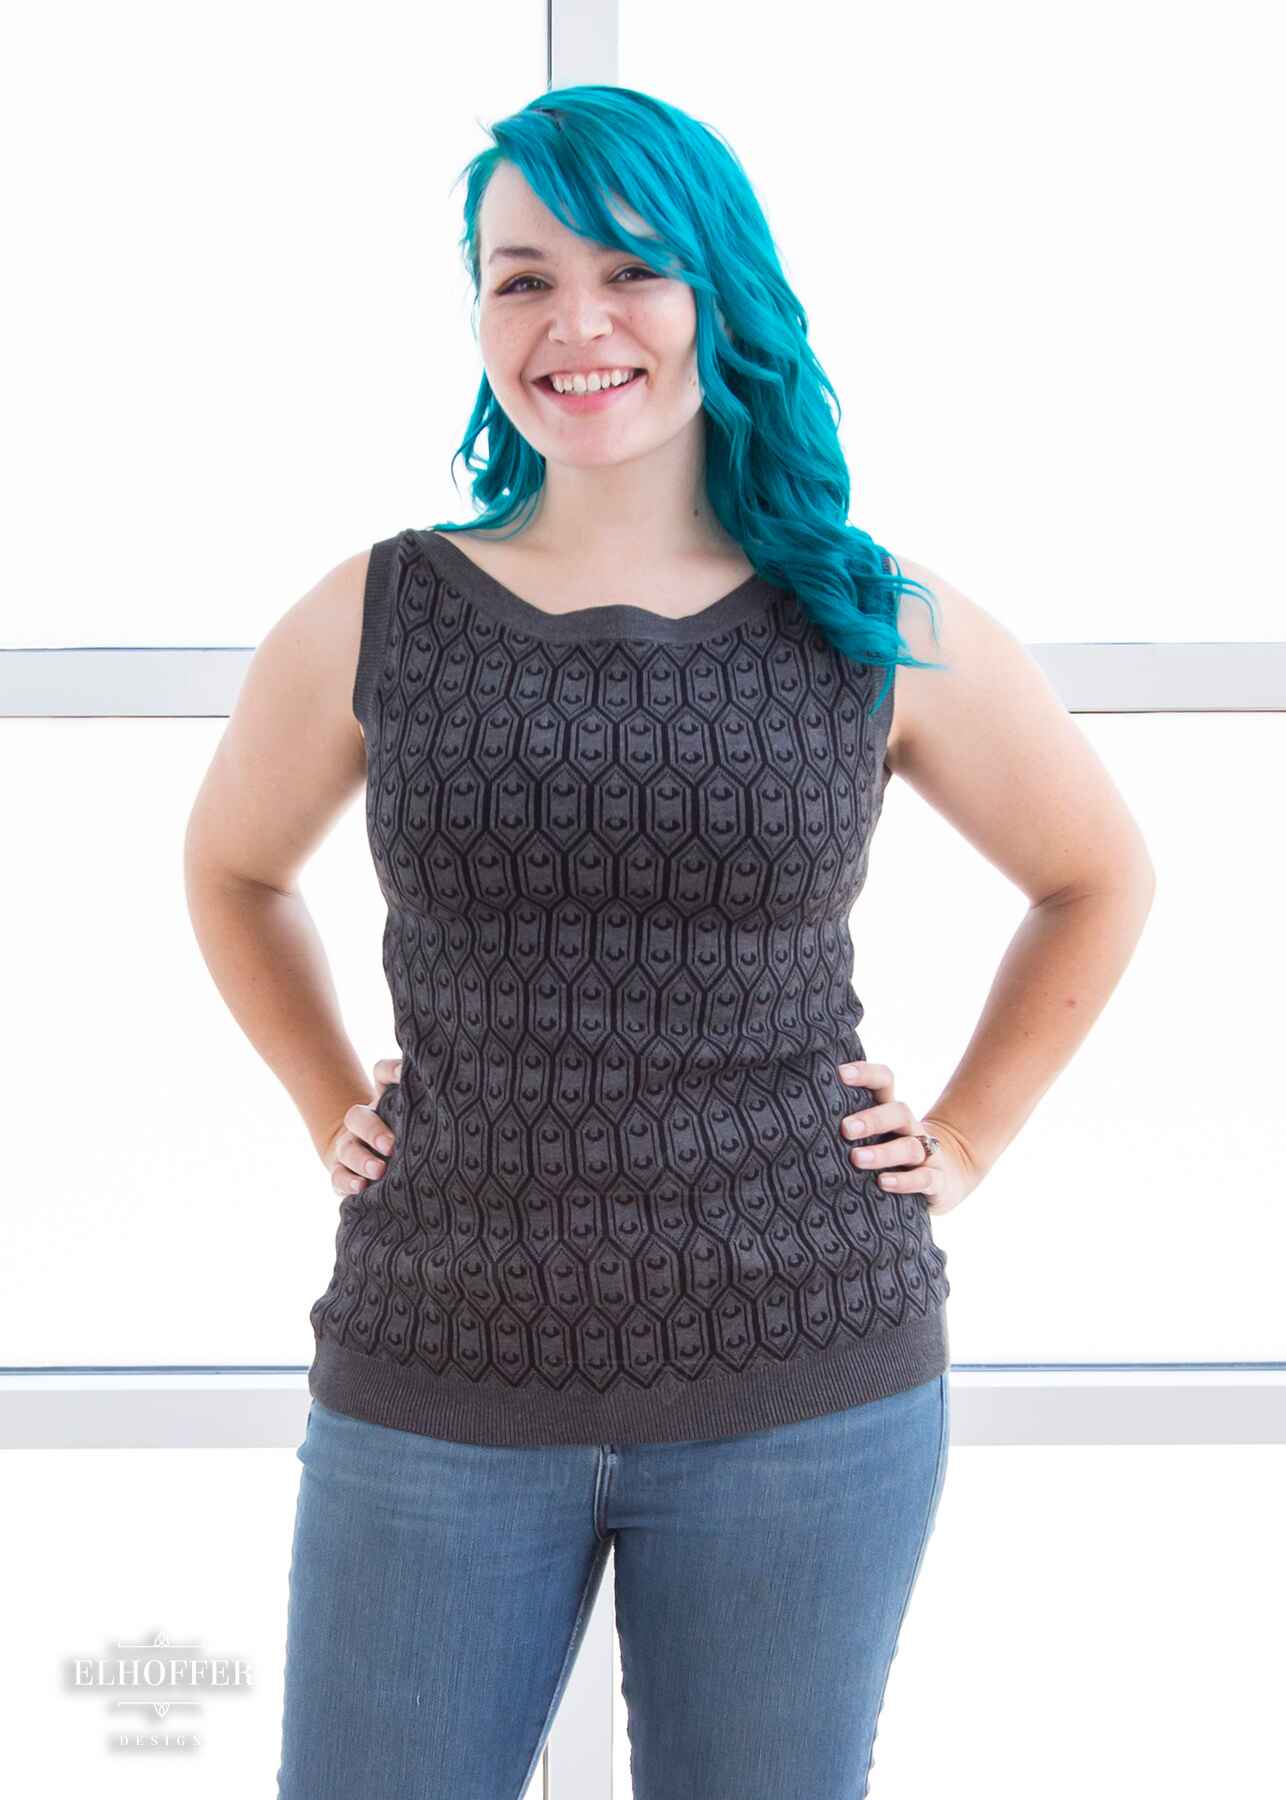 Kiri, a fair skinned S model with long wavy teal hair, is smiling while wearing a knit sleeveless top with a boatneck and an armor plated design.